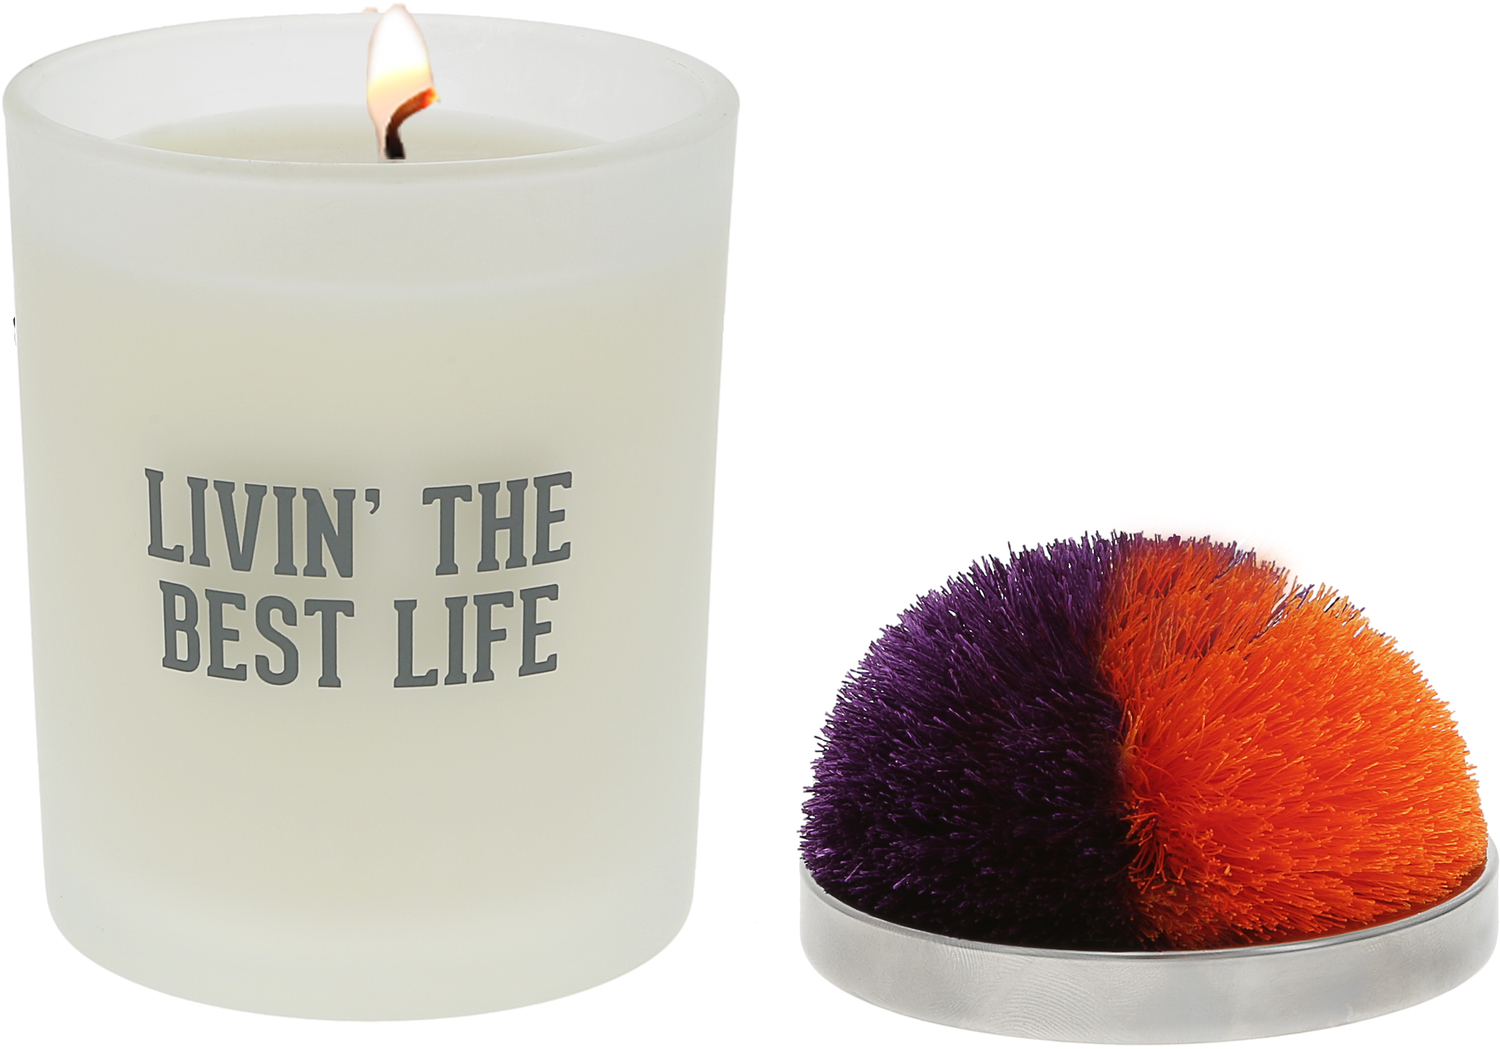 Best Life - Purple & Orange by Repre-Scent - Best Life - Purple & Orange - 5.5 oz - 100% Soy Wax Candle with Pom Pom Lid
Scent: Tranquility